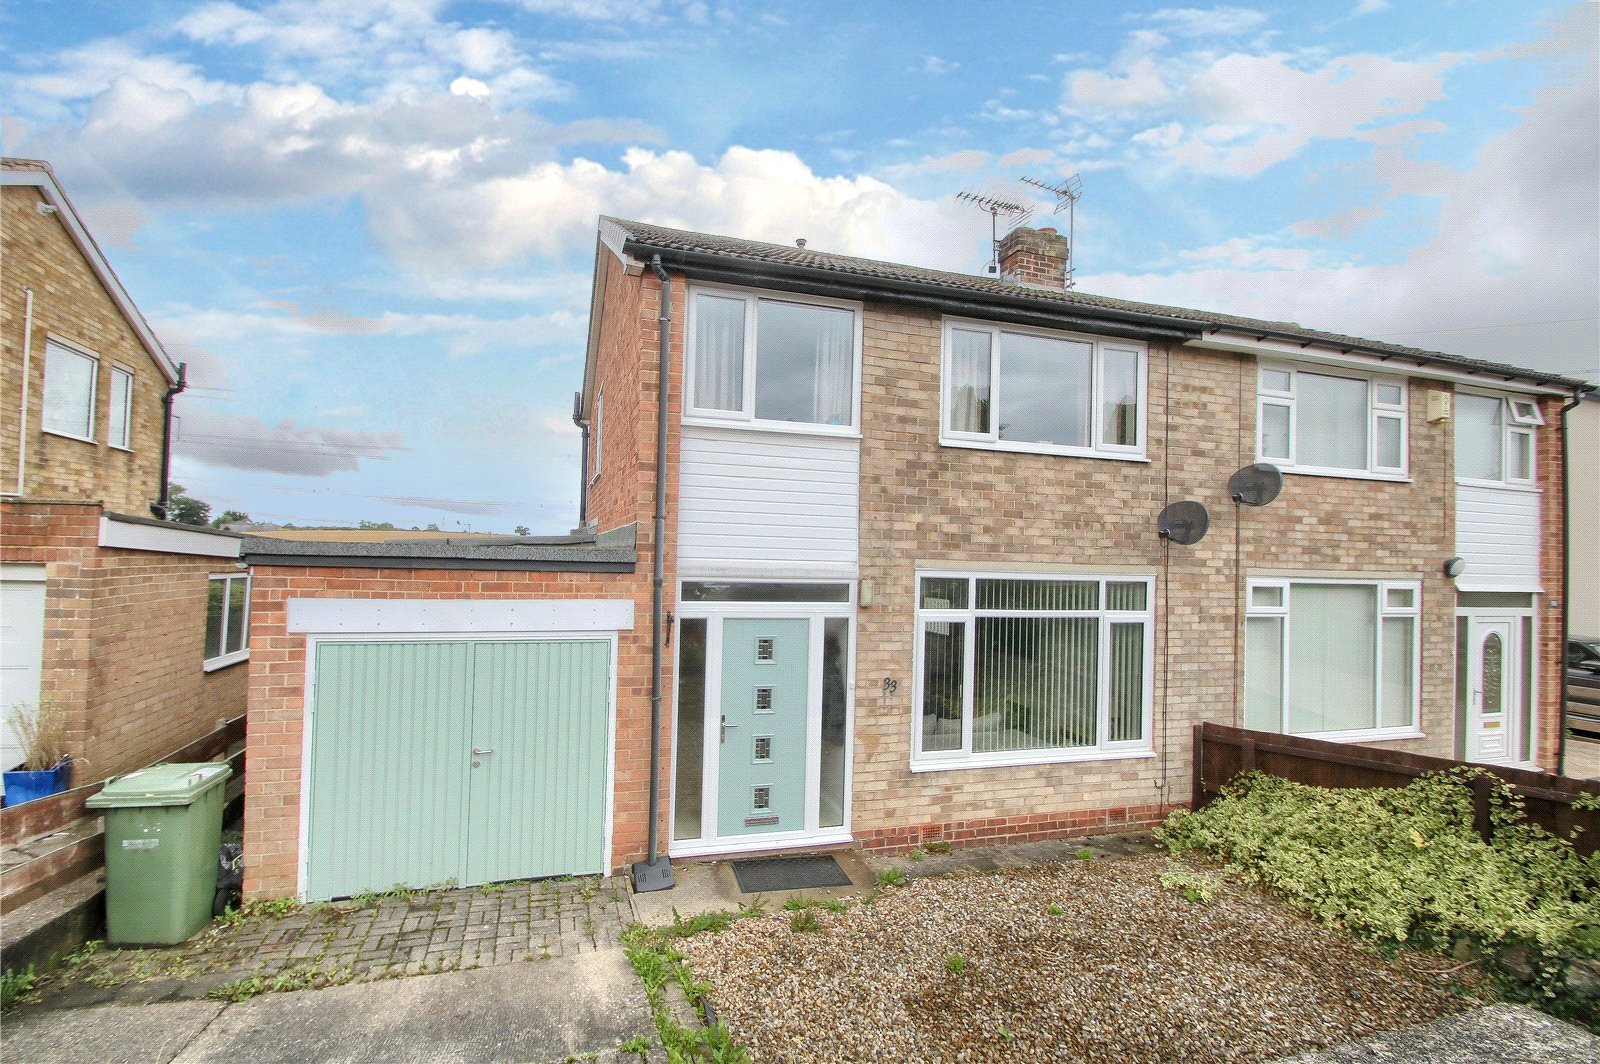 3 bed house for sale in Seymour Drive, Eaglescliffe 1